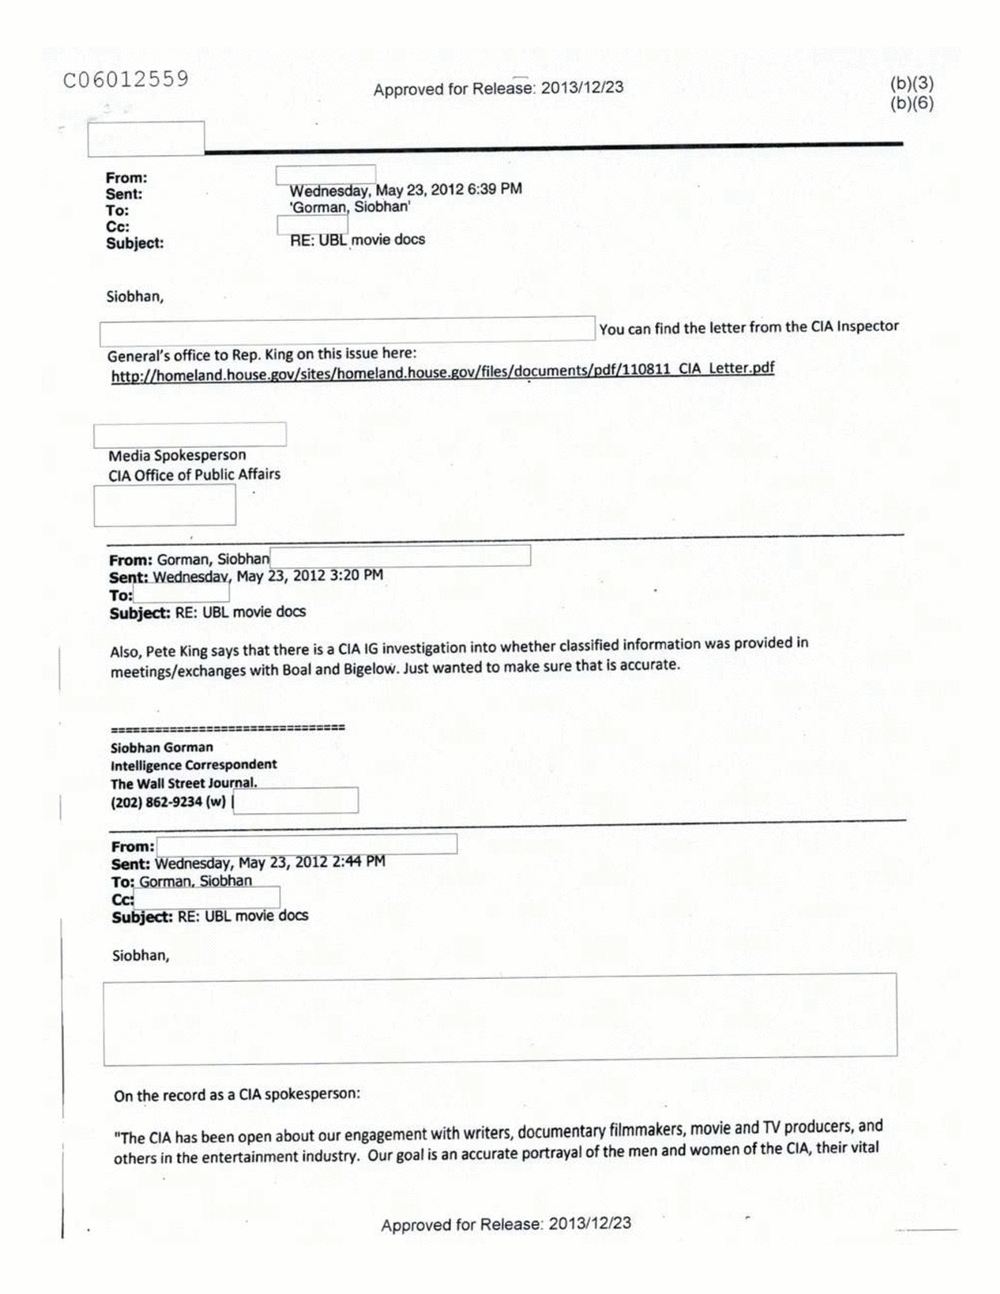 Page 162 from Email Correspondence Between Reporters and CIA Flacks